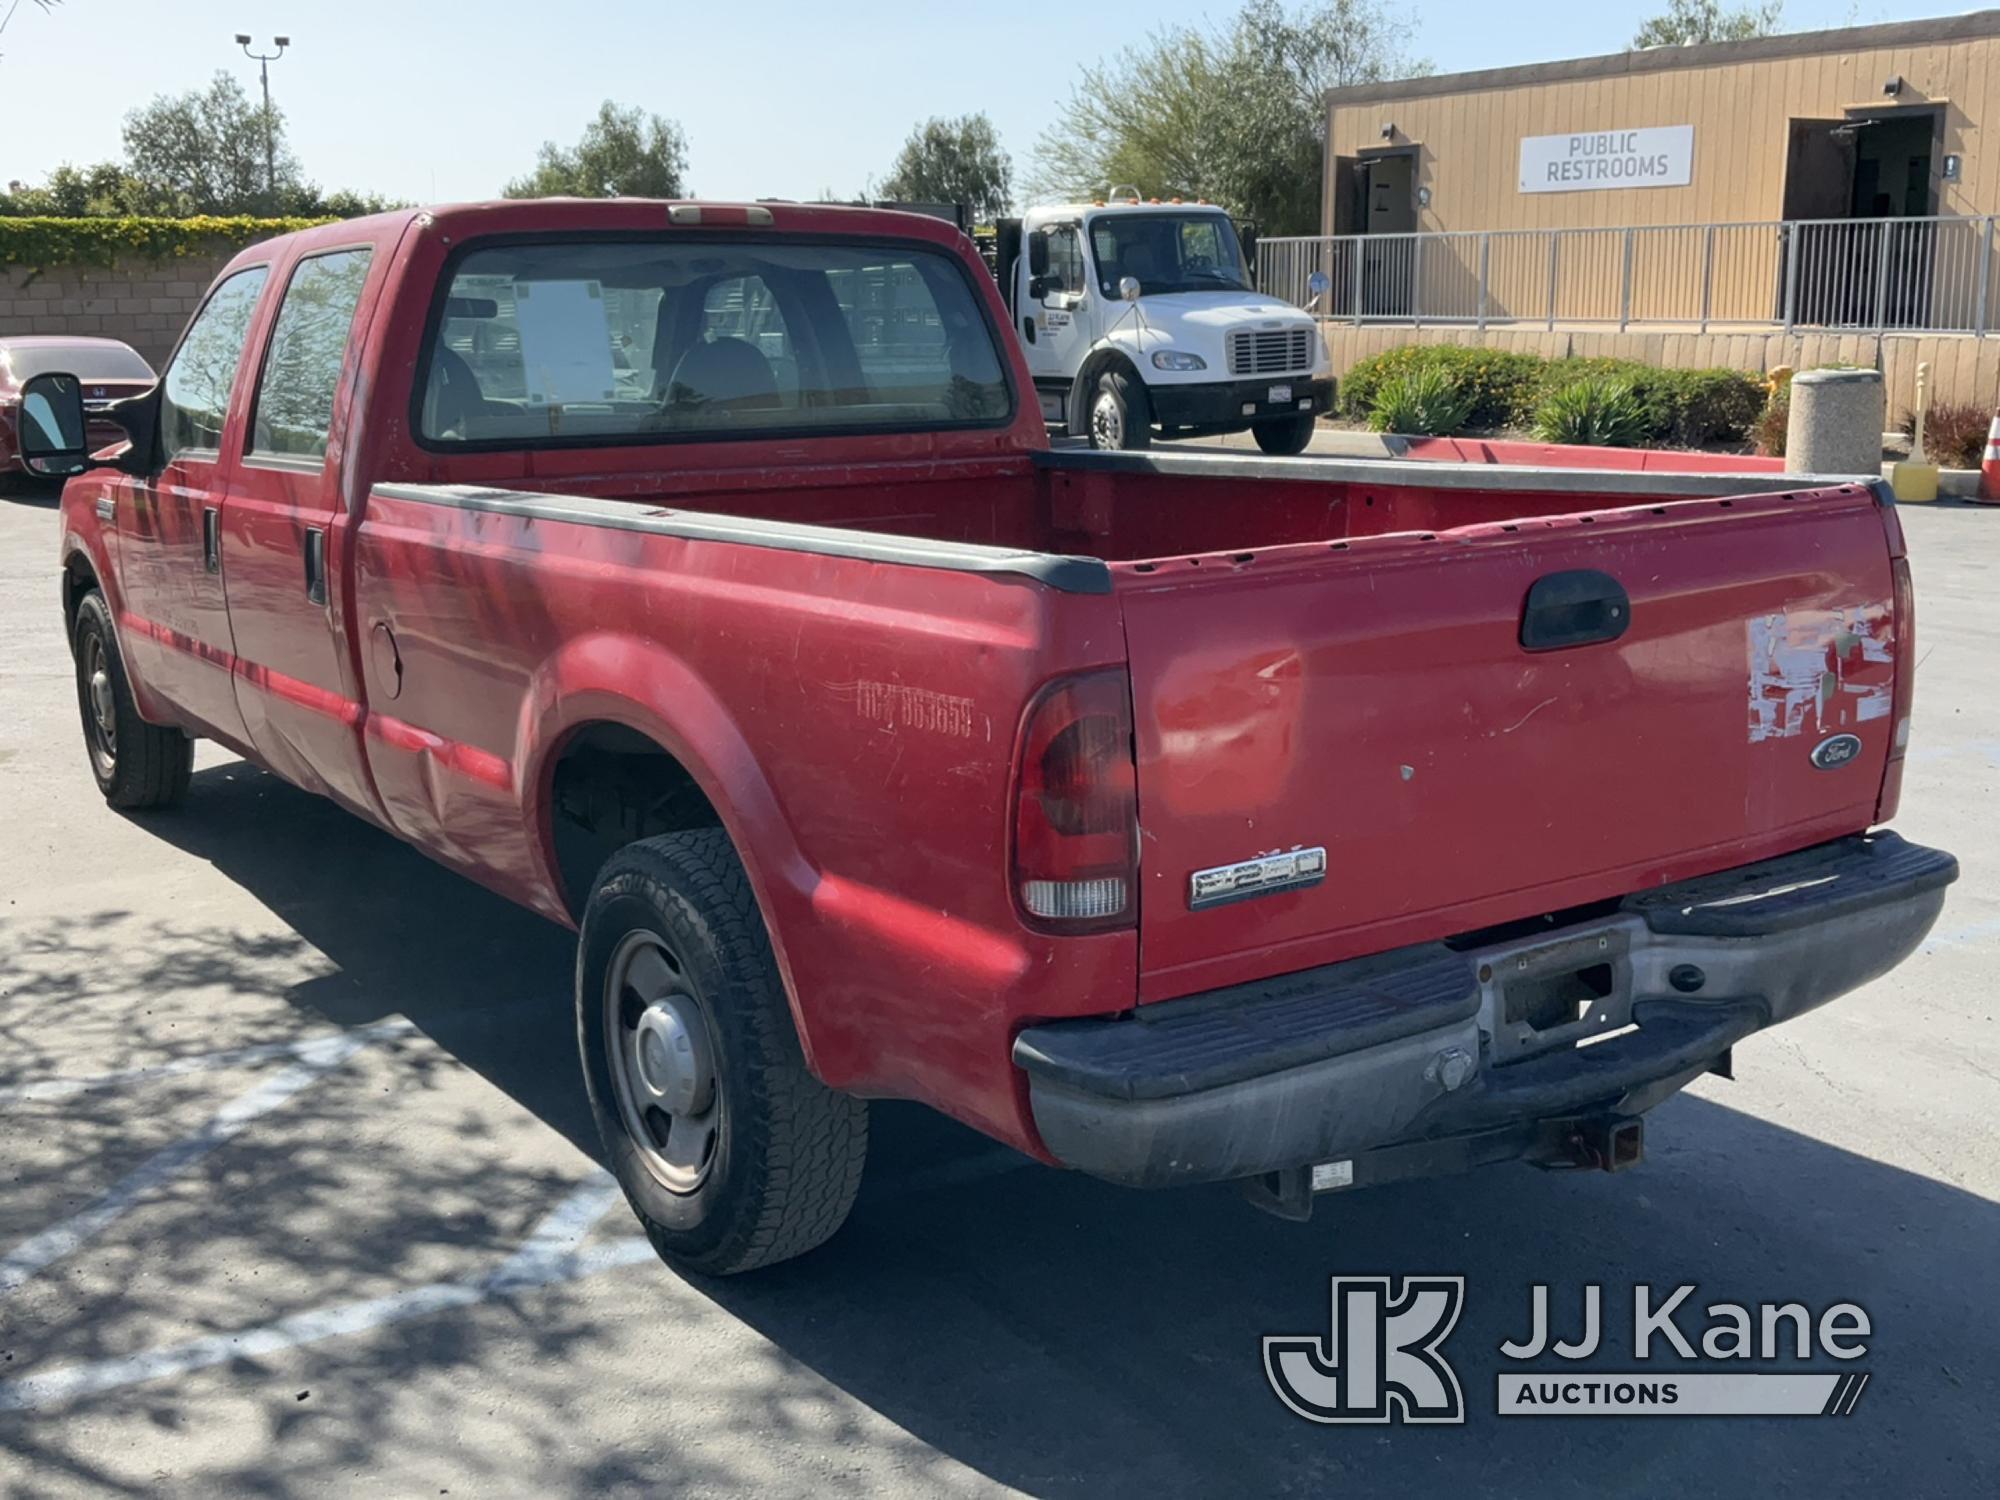 (Jurupa Valley, CA) 2006 Ford F250 Crew-Cab Pickup Truck Runs & Moves, Cracked Windshield, Horn Does